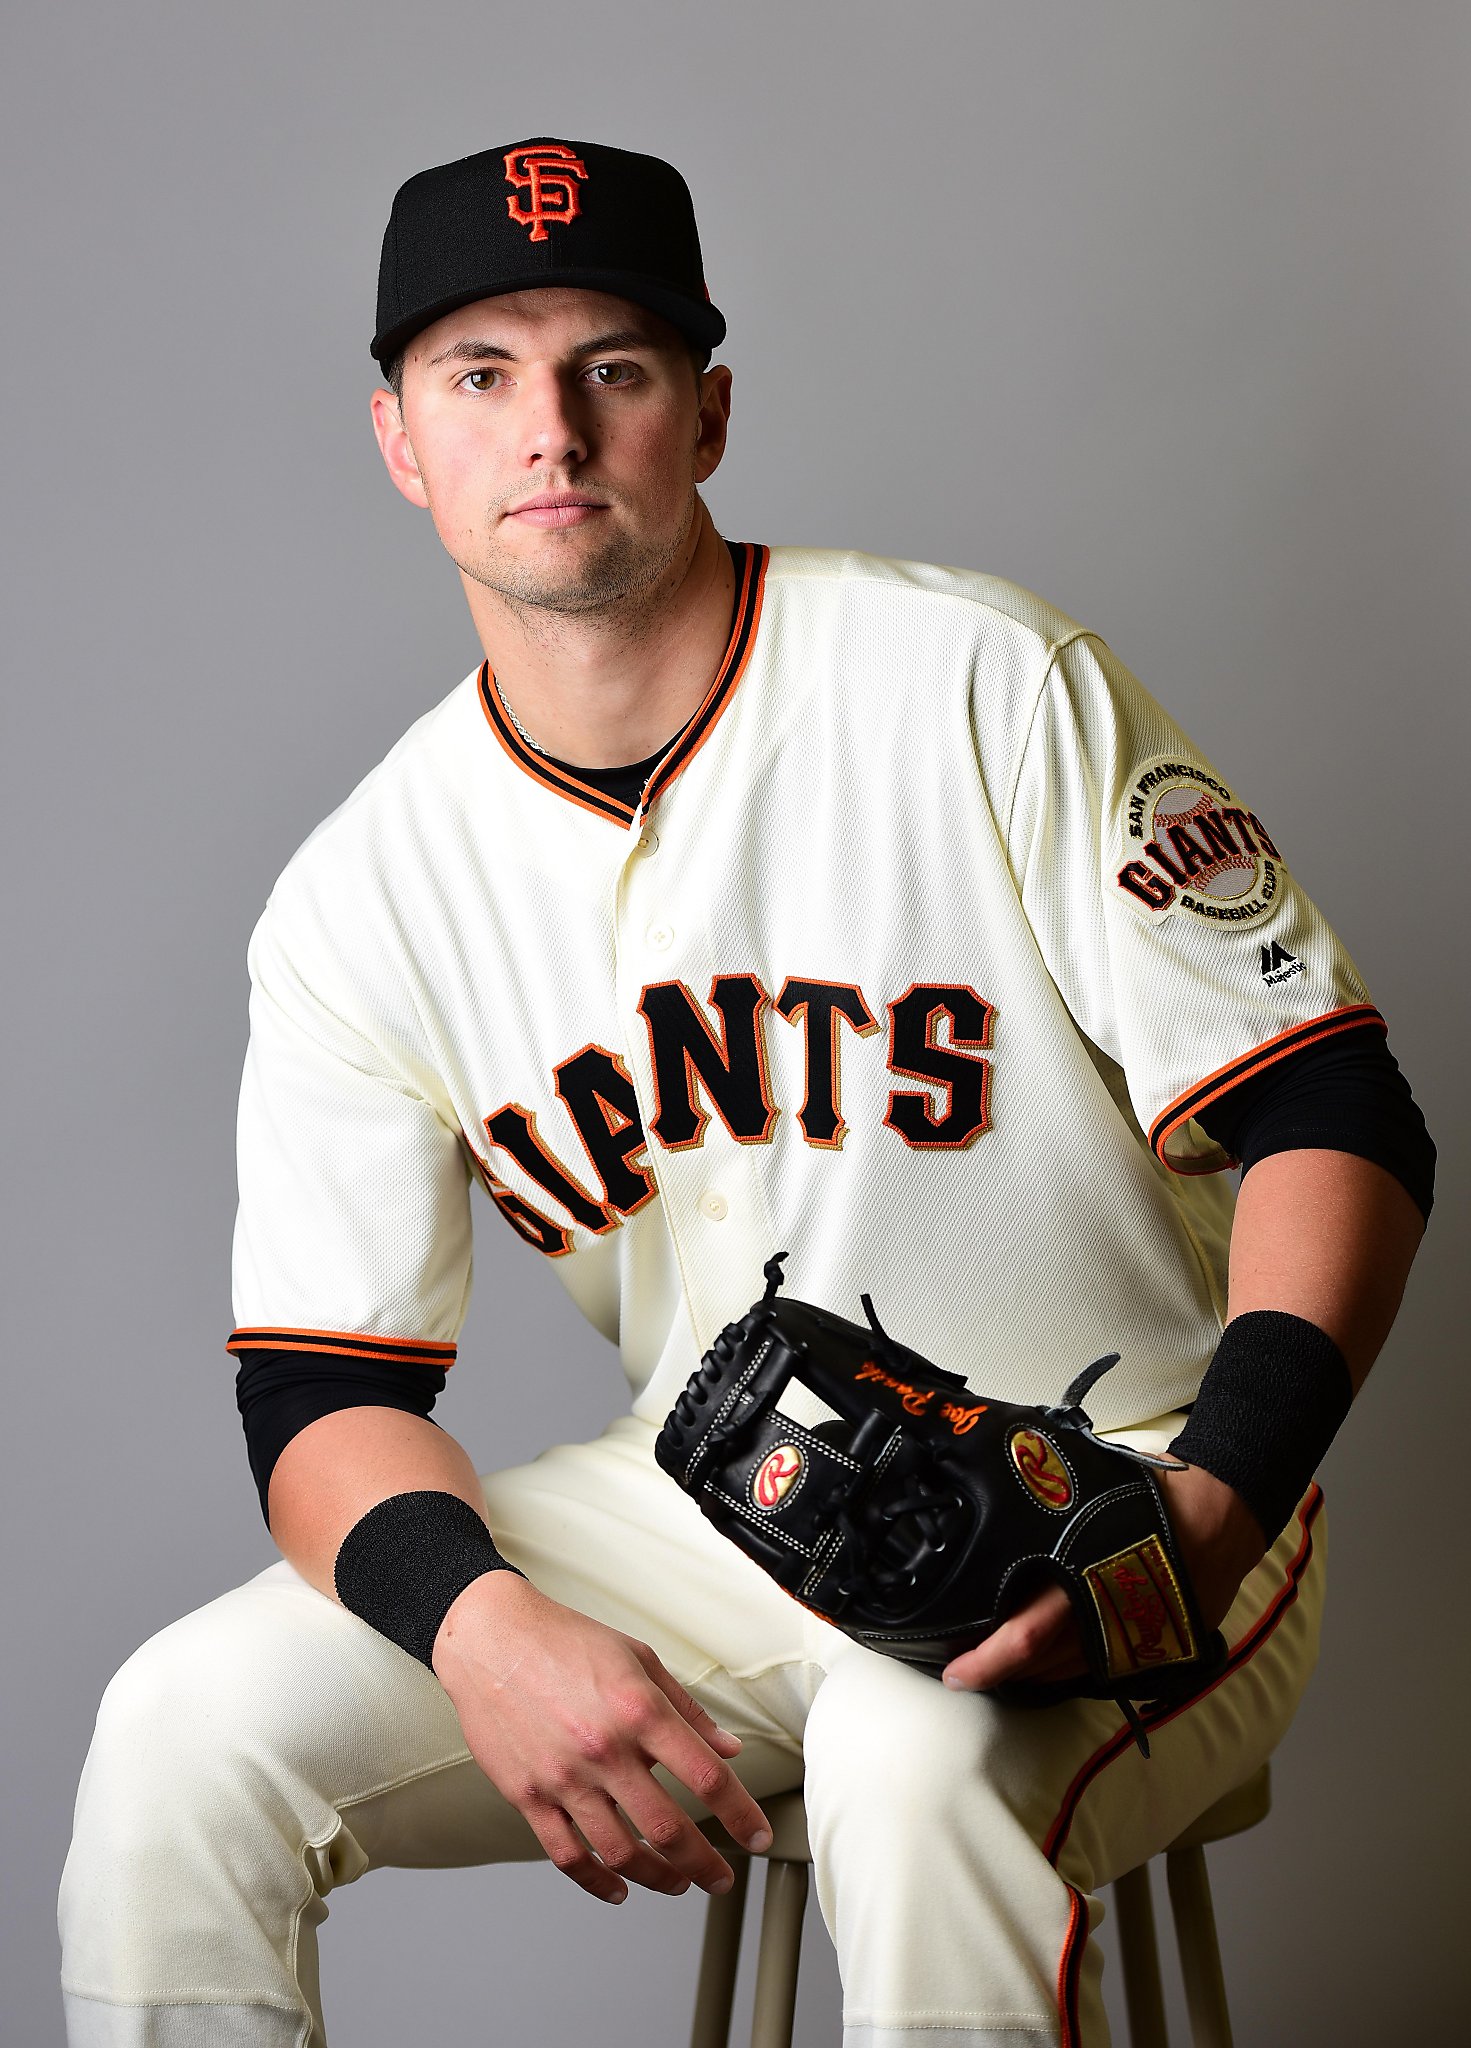 Buster Posey Was By Far the GOAT Giants Catcher - Pro Sports Outlook